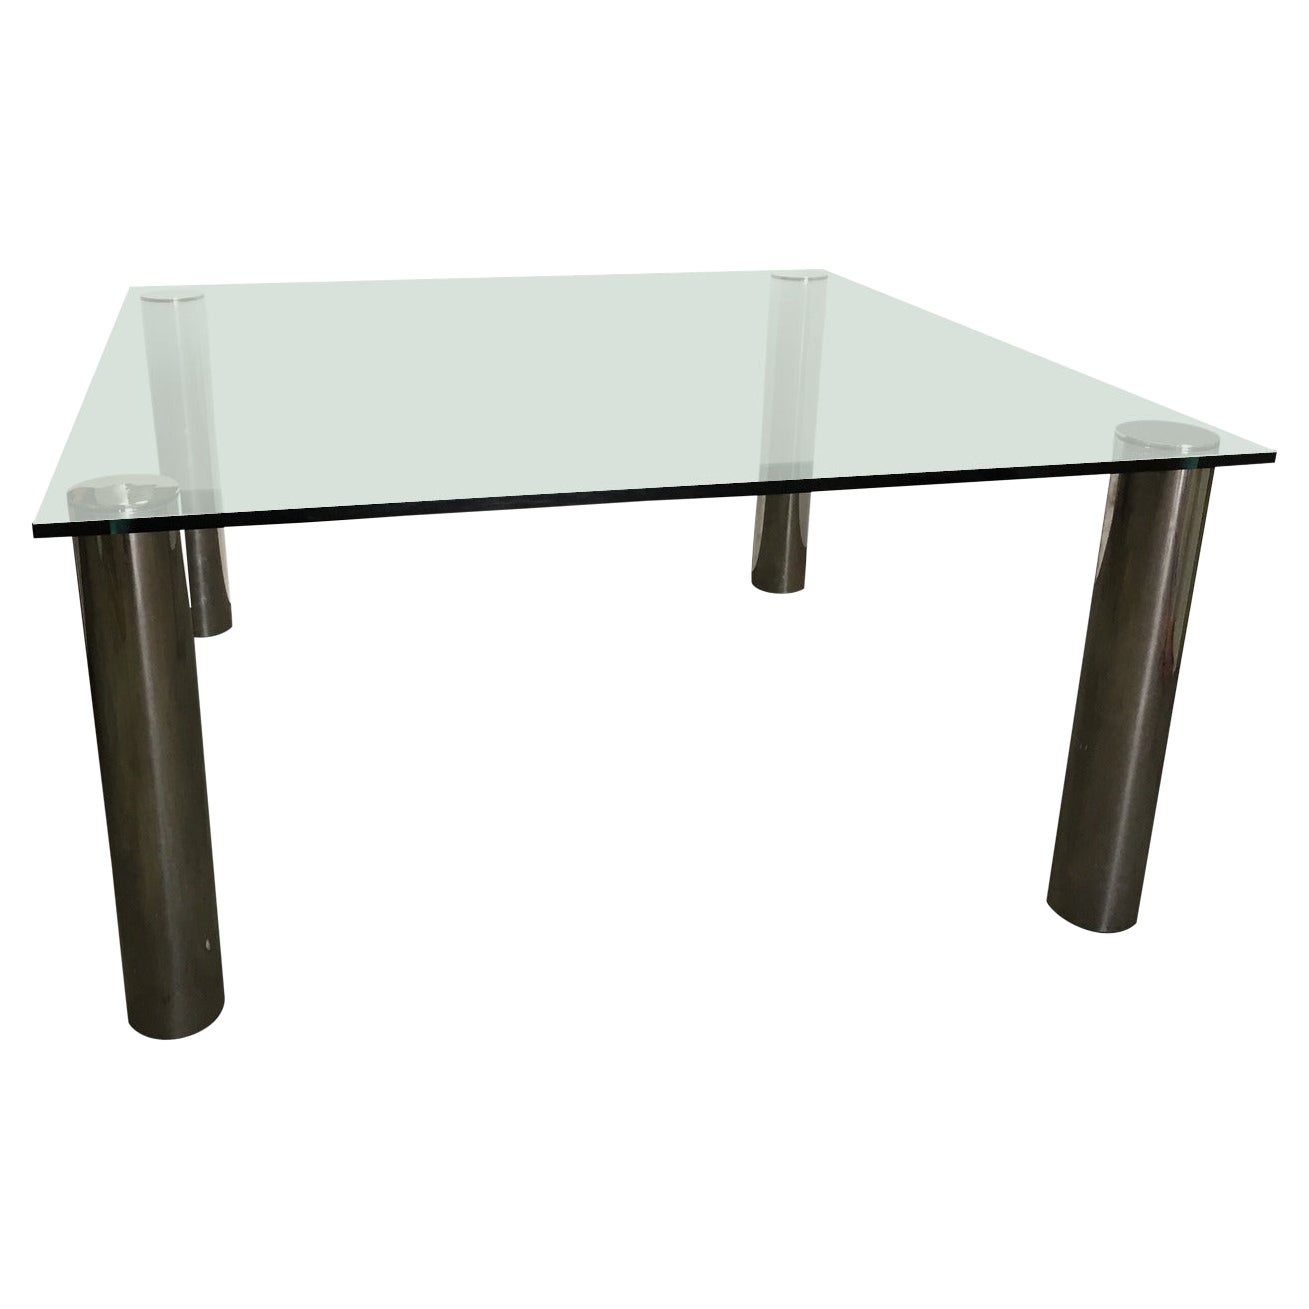 Pace Oversized Square Chrome and Glass Dining Table